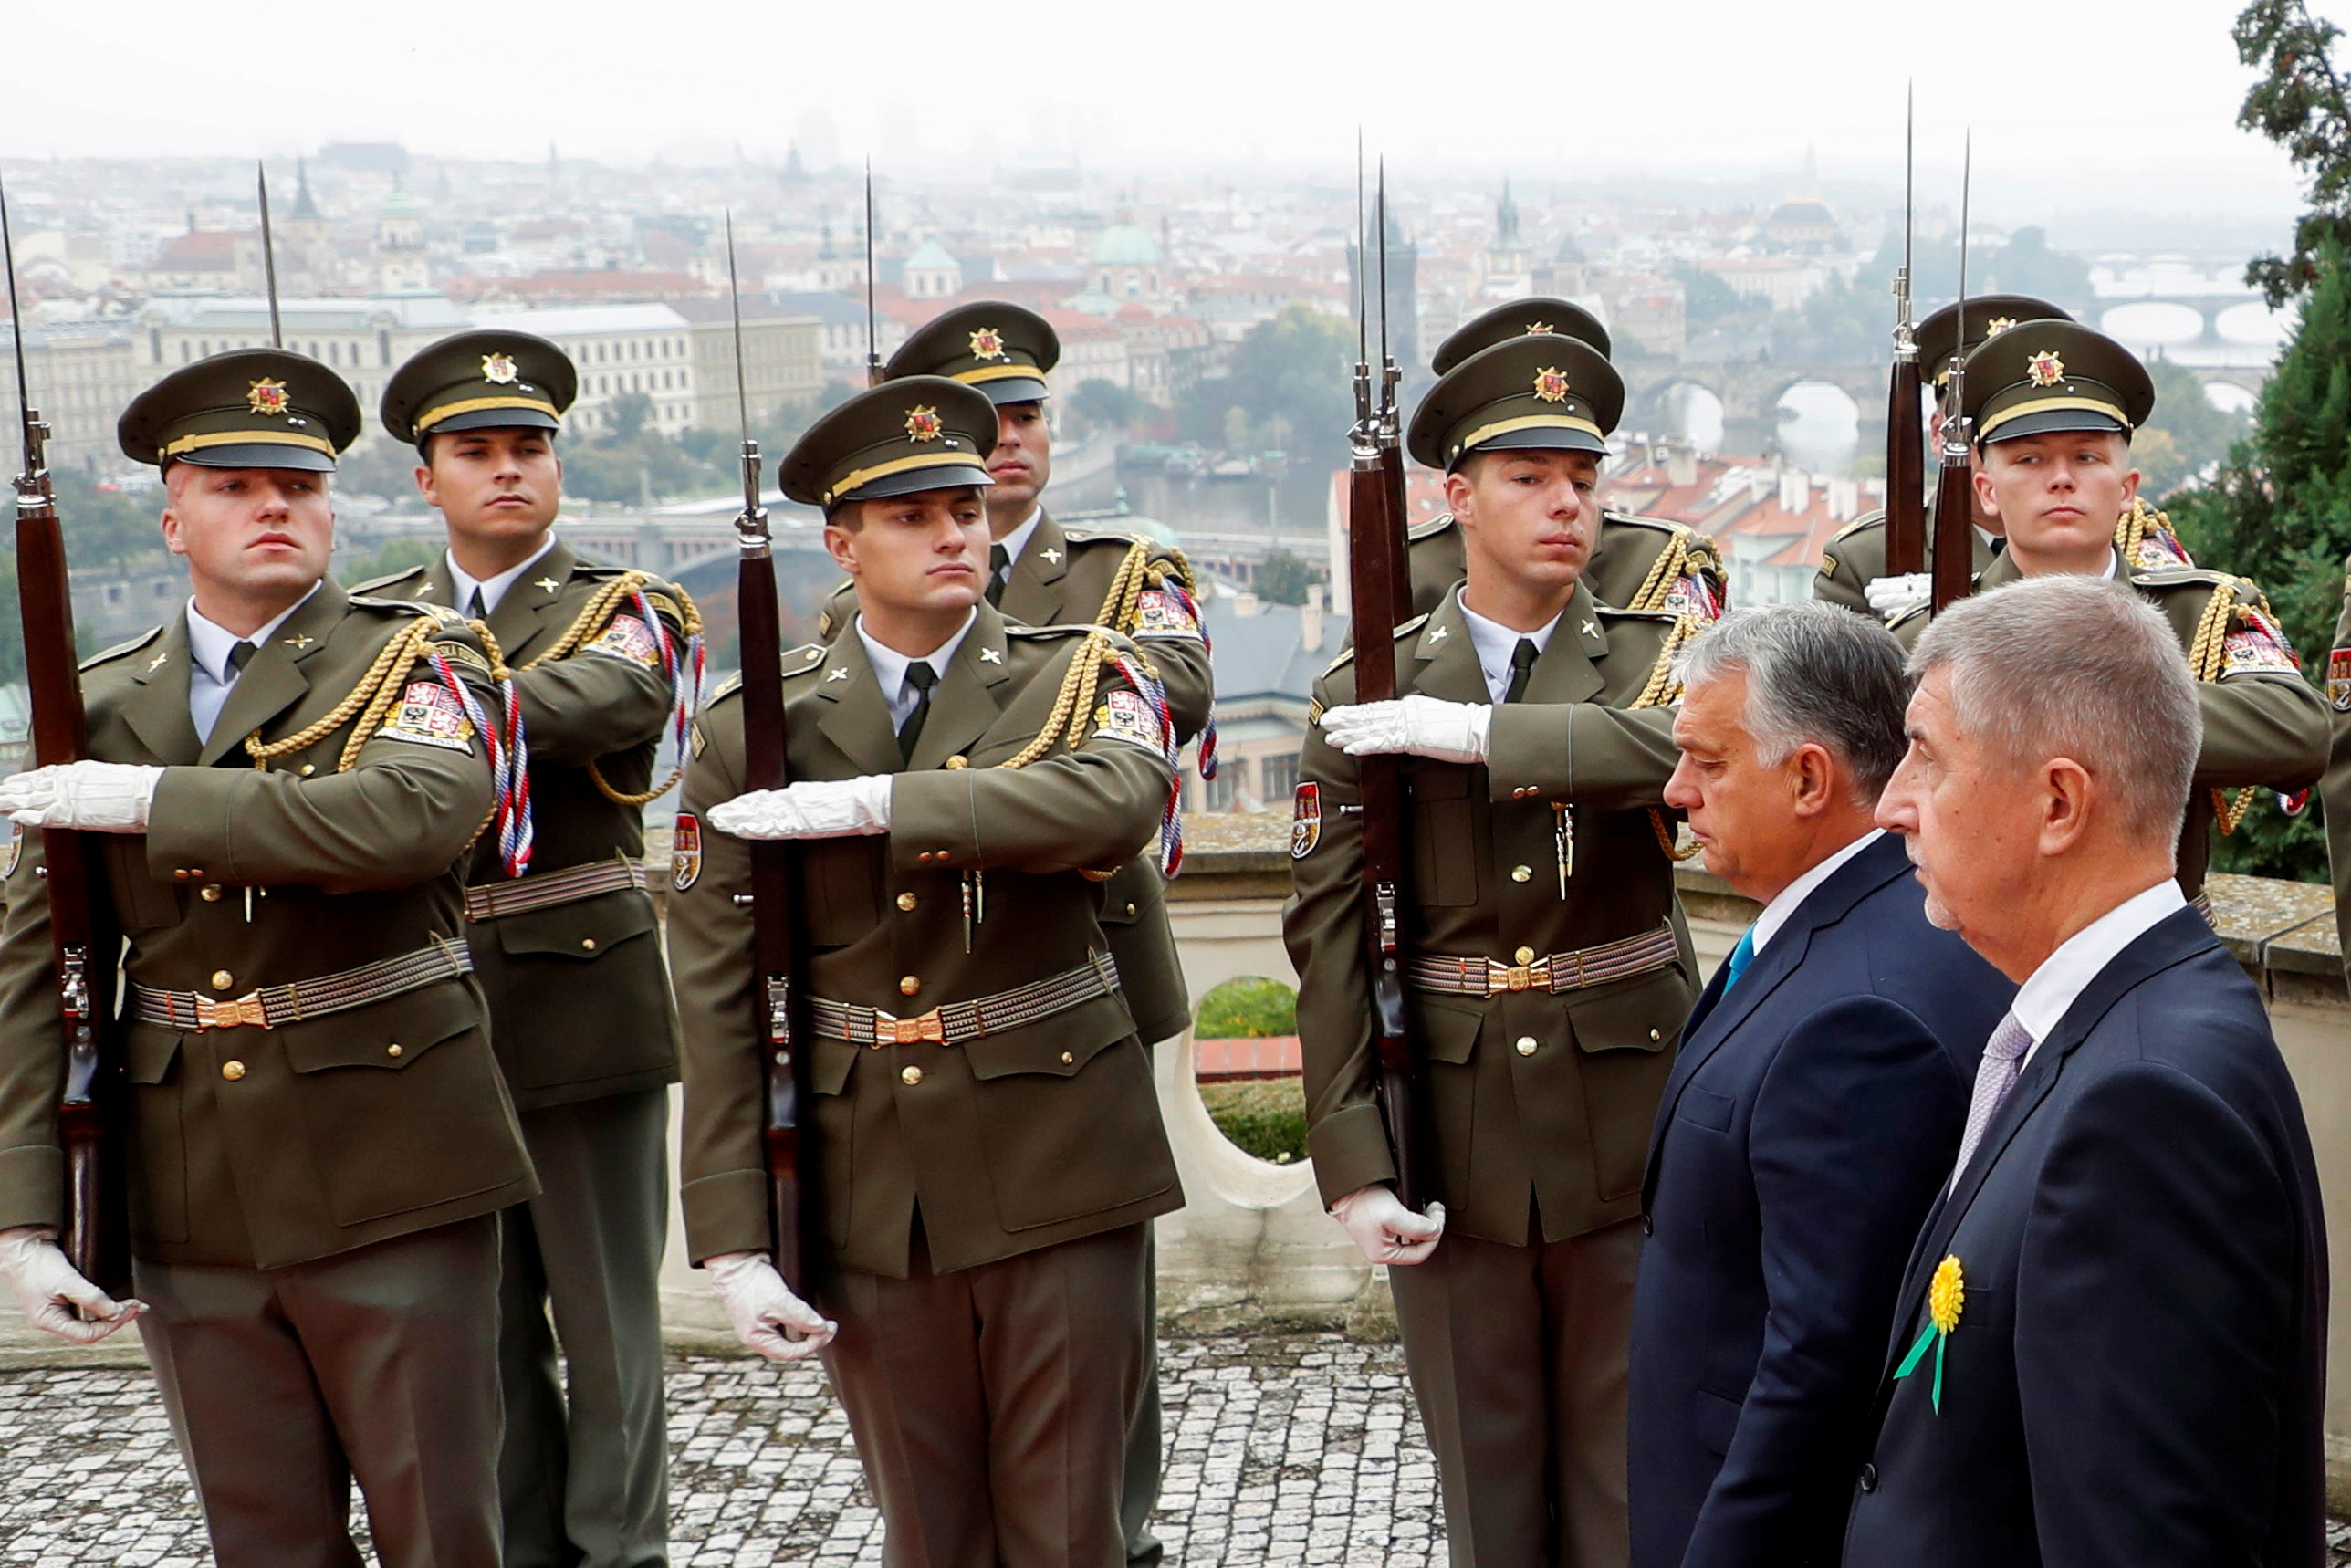 Czech Republic's Prime Minister Andrej Babis and Hungary's Prime Minister Viktor Orban review the guard of honour during the welcoming ceremony at the Kramar's Villa in Prague, Czech Republic, September 29, 2021. REUTERS/David W Cerny